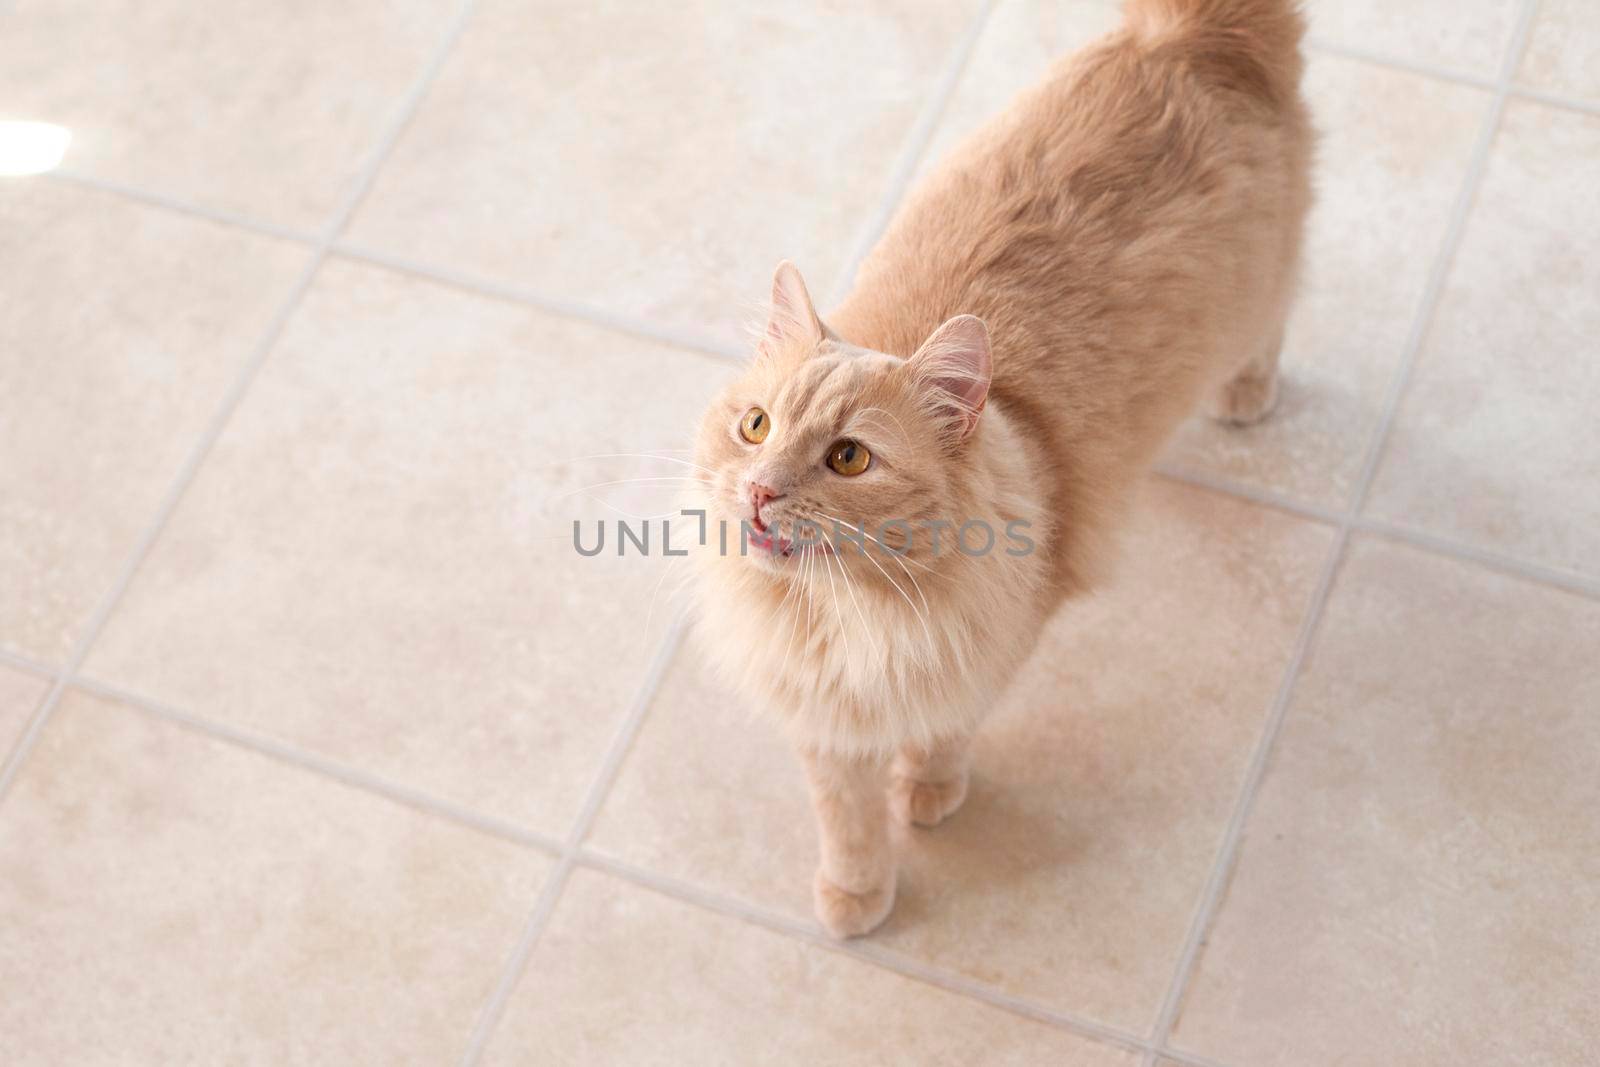 Orange cat stands on floor with mouth open making meow or chittering 